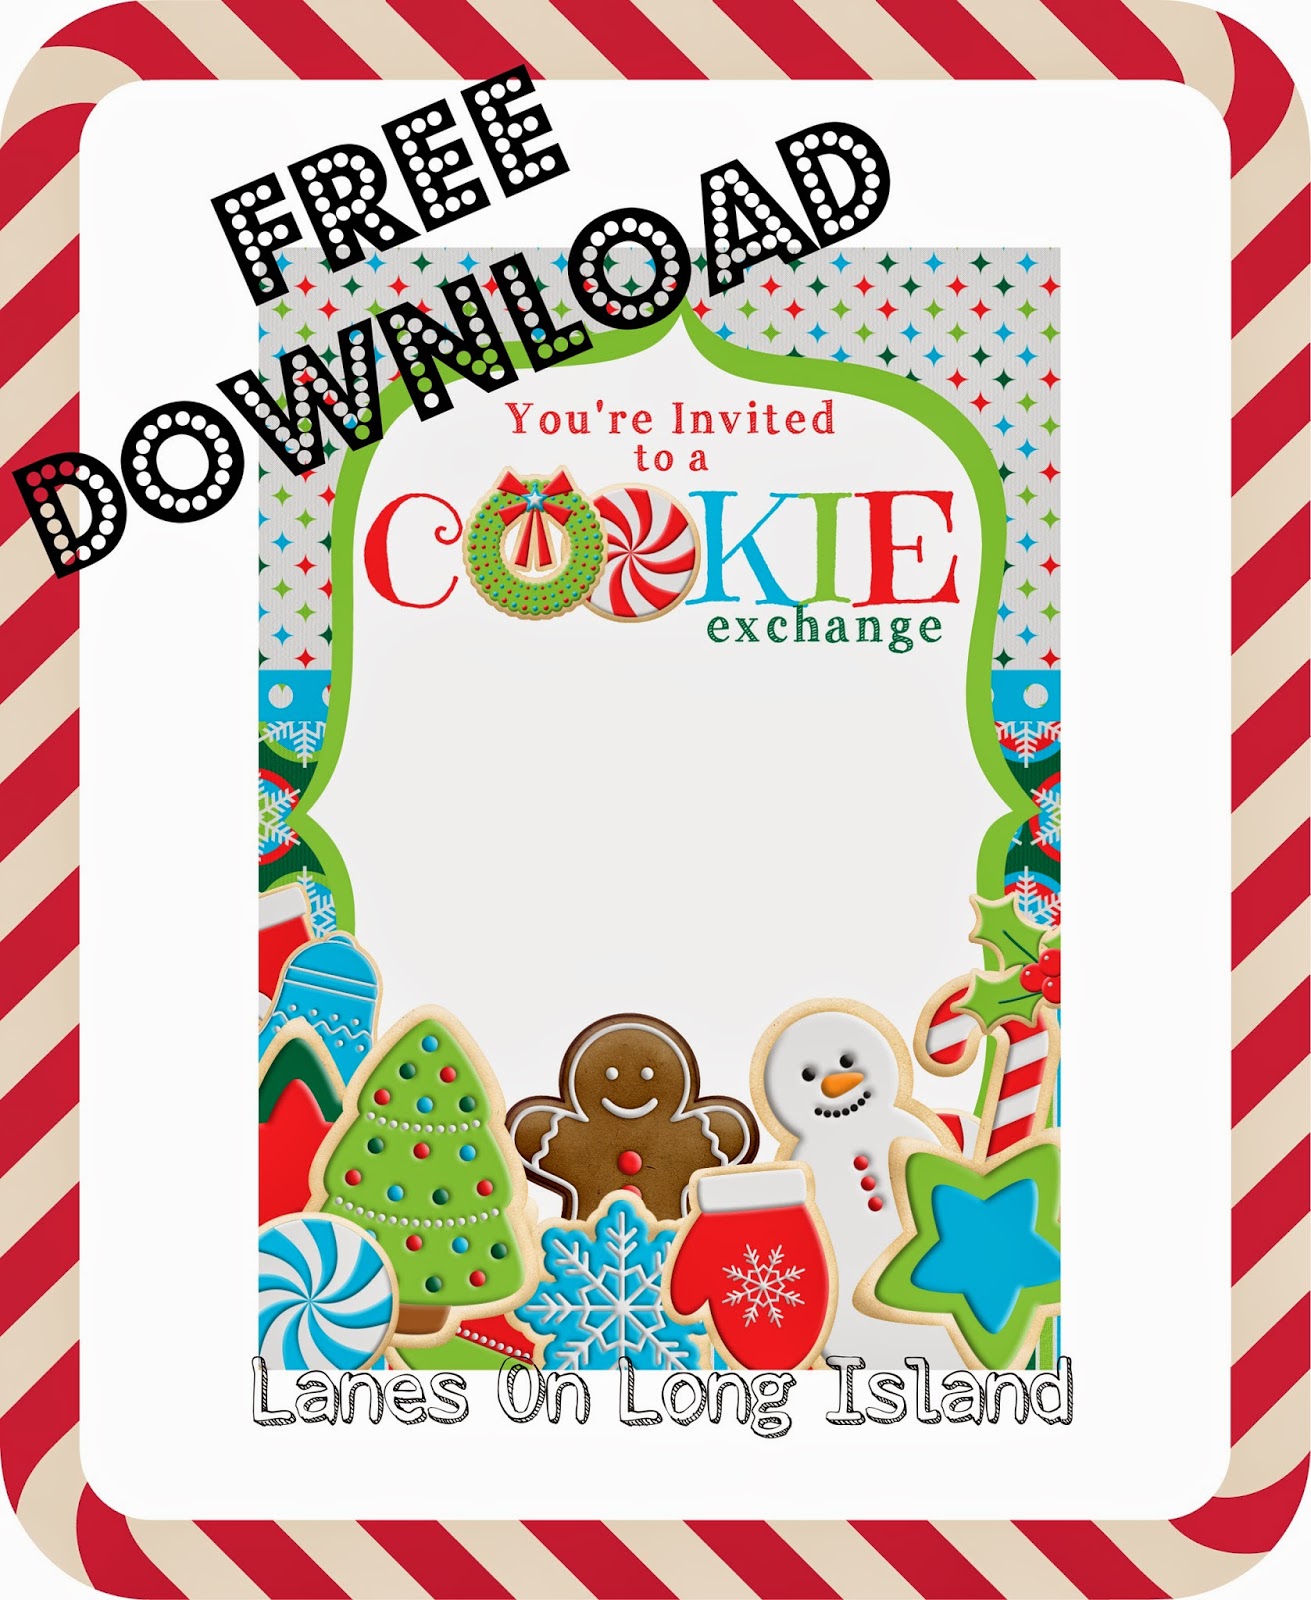 lanes-on-long-island-cookie-exchange-invitations-free-download